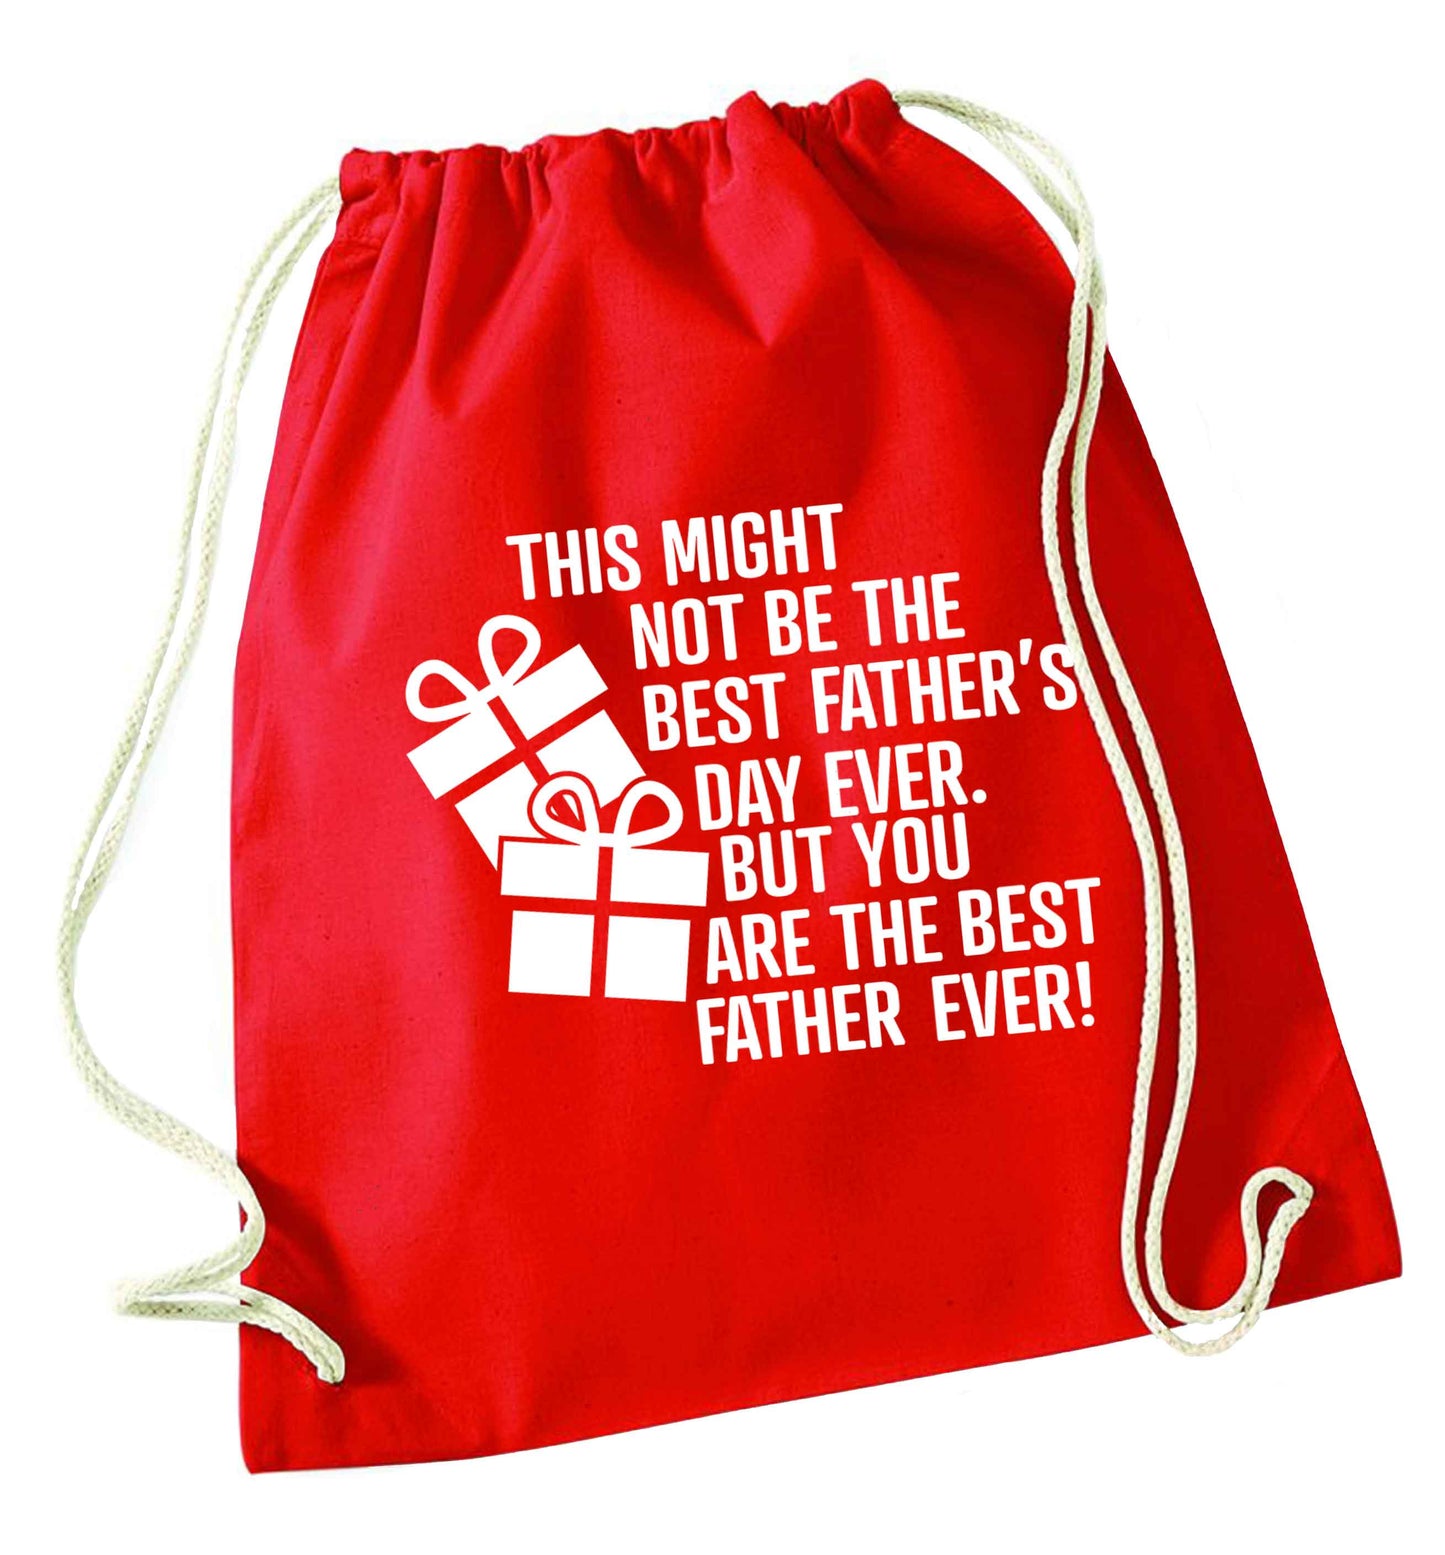 It might not be the best Father's Day ever but you are the best father ever! red drawstring bag 